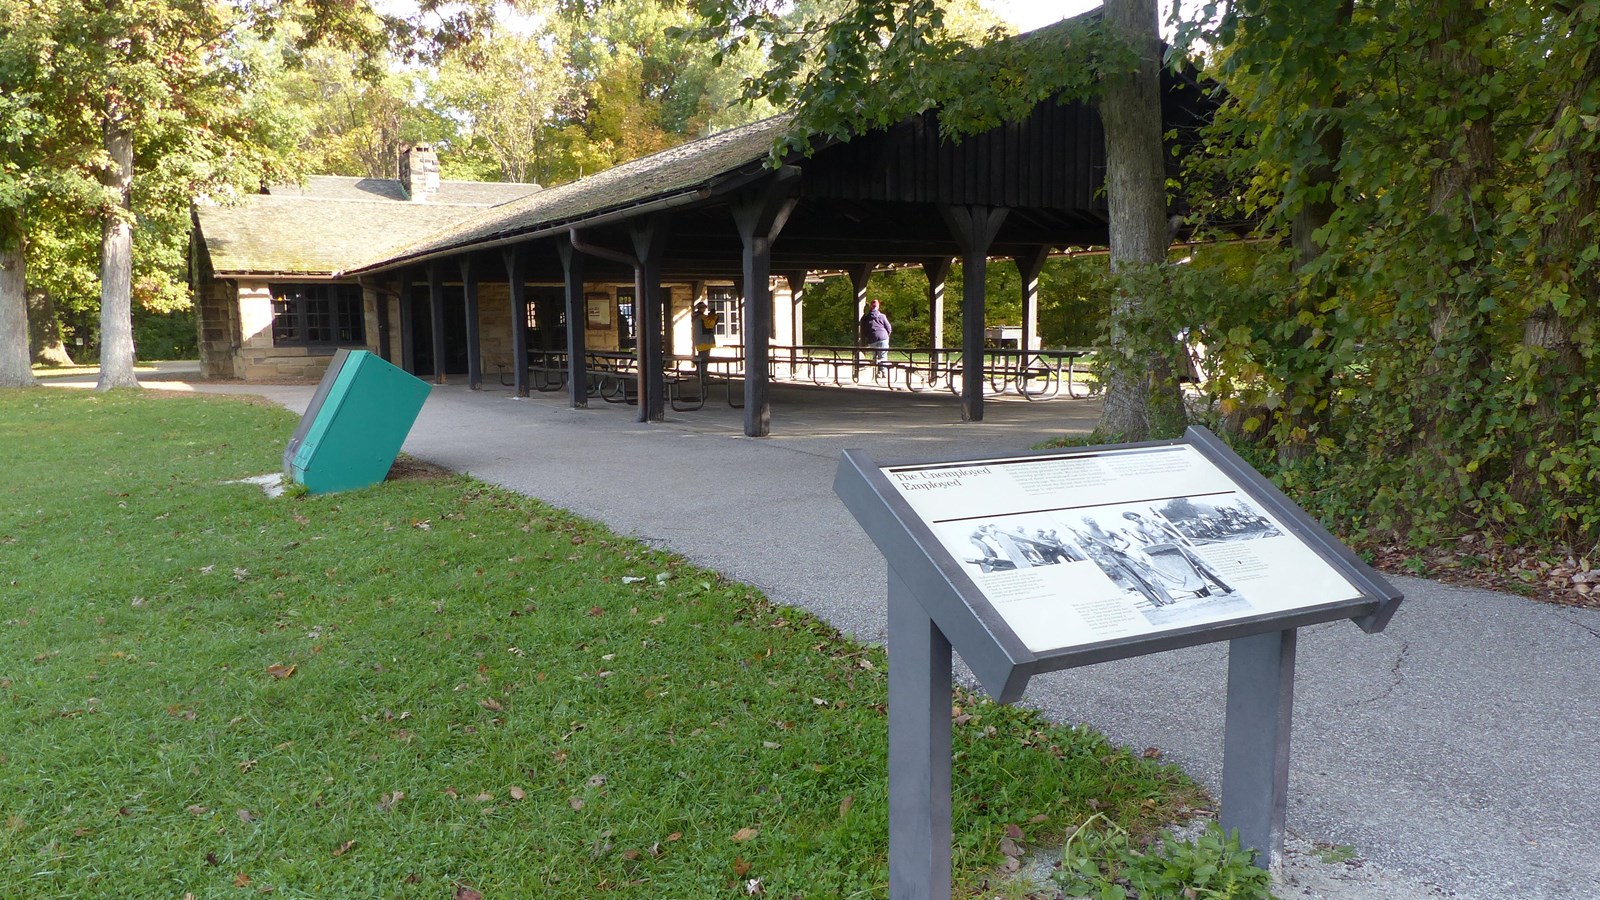 Graphic panel along a paved path to a rustic shelter; rows of picnic tables under its roofed porch.